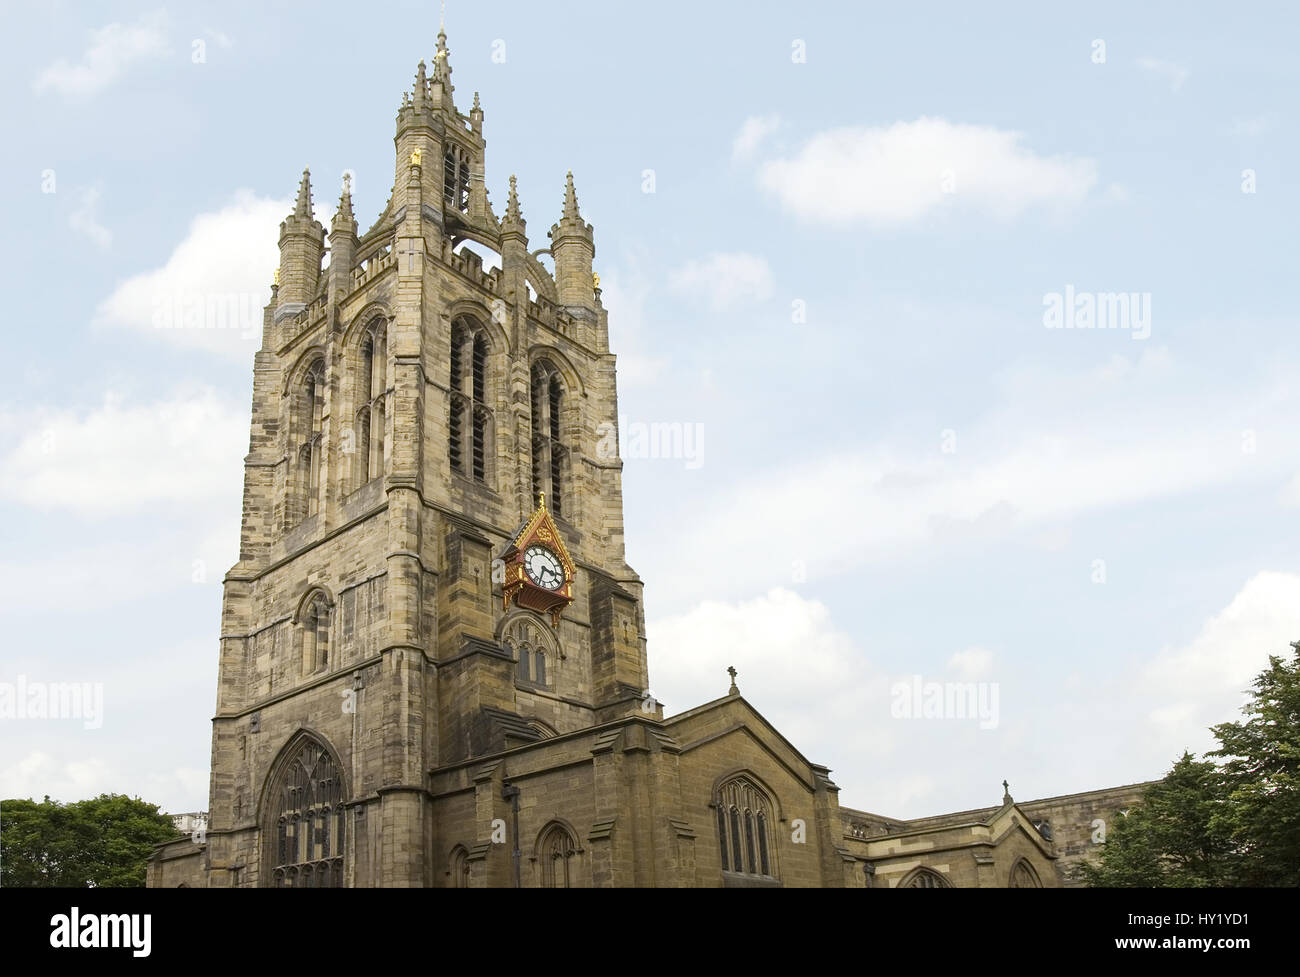 St Nicholas's Cathedral is a Church of England cathedral in Newcastle upon Tyne; England. The cathedral is notable for its unusual lantern spire, whic Stock Photo